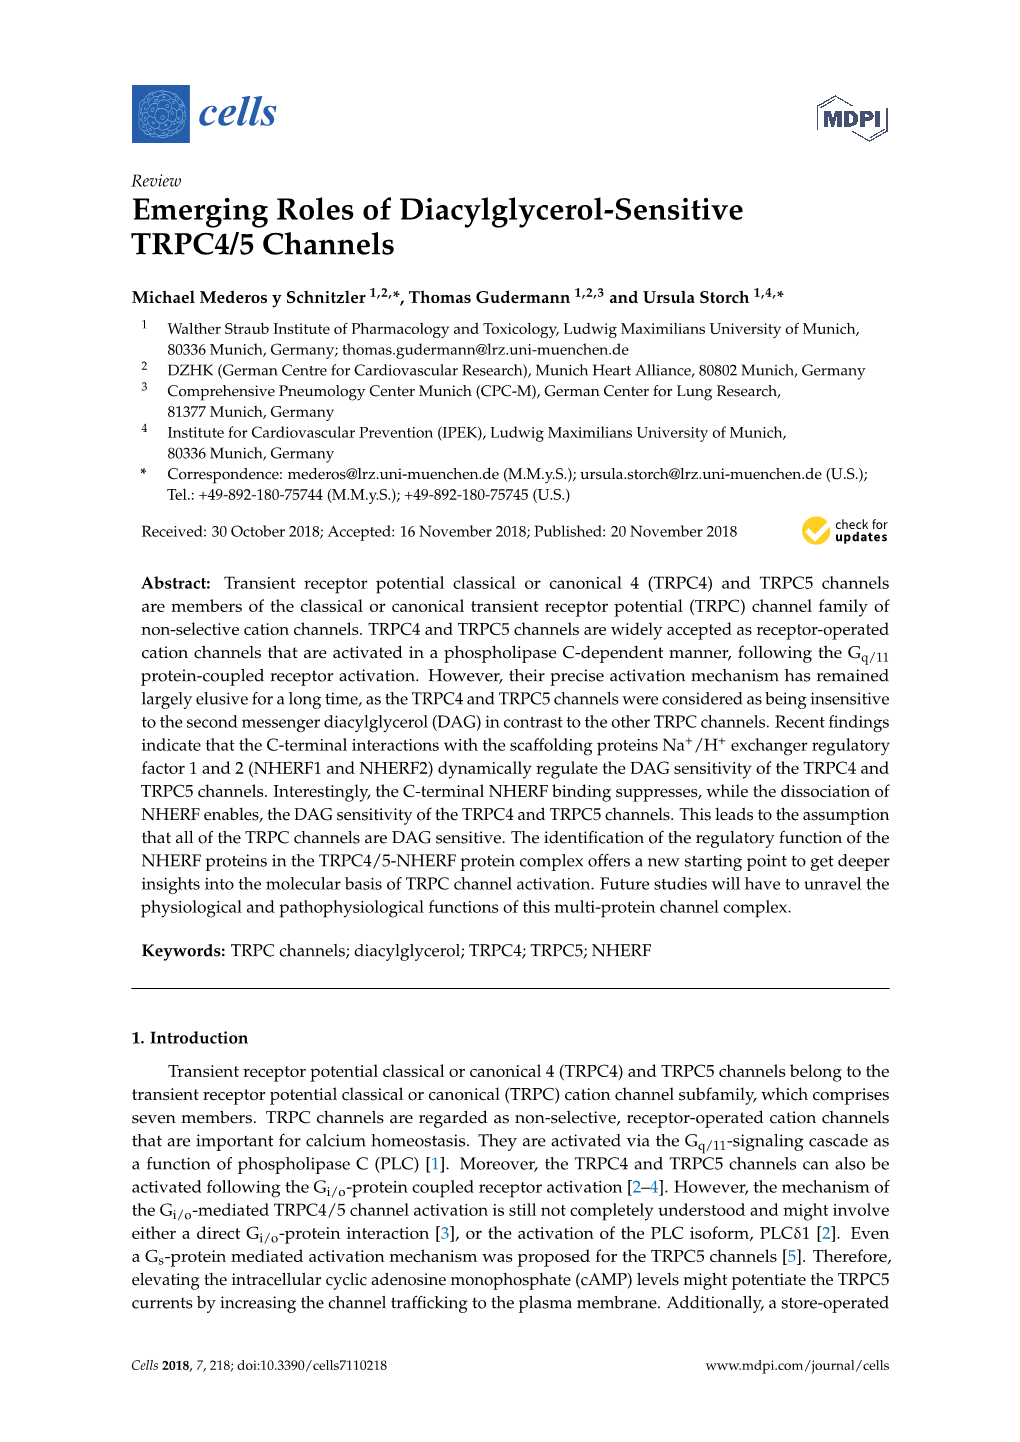 Emerging Roles of Diacylglycerol-Sensitive TRPC4/5 Channels